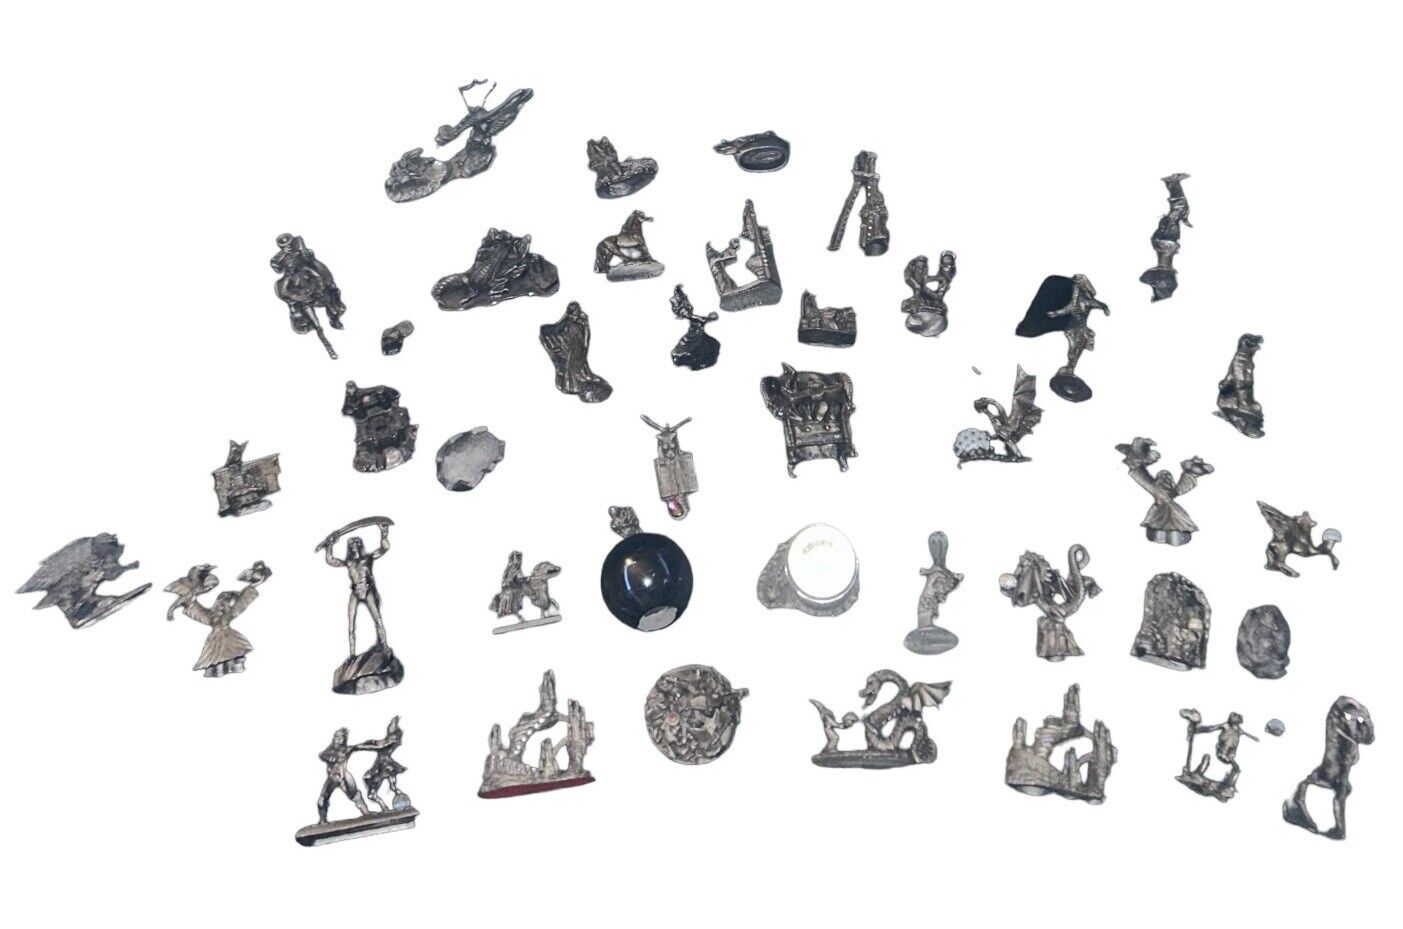 Vintage Pewter Figurines Fantasy Lot of 41 Dragons Wizards Castles Etc 80s 90s